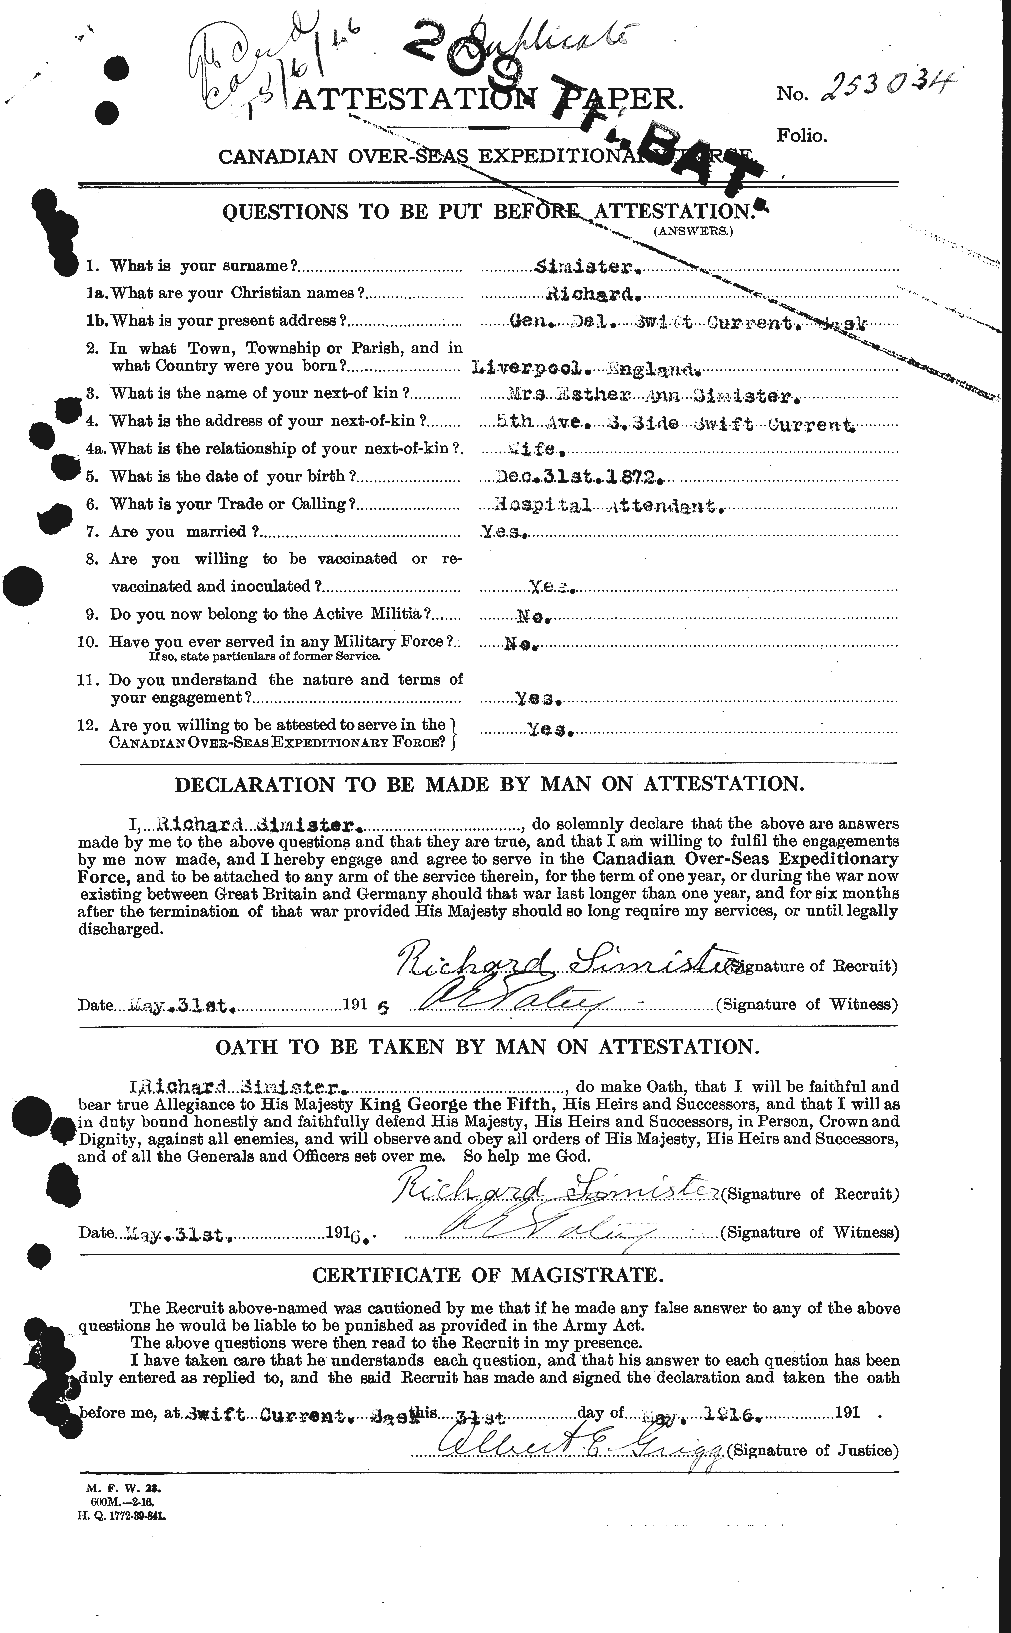 Personnel Records of the First World War - CEF 100251a